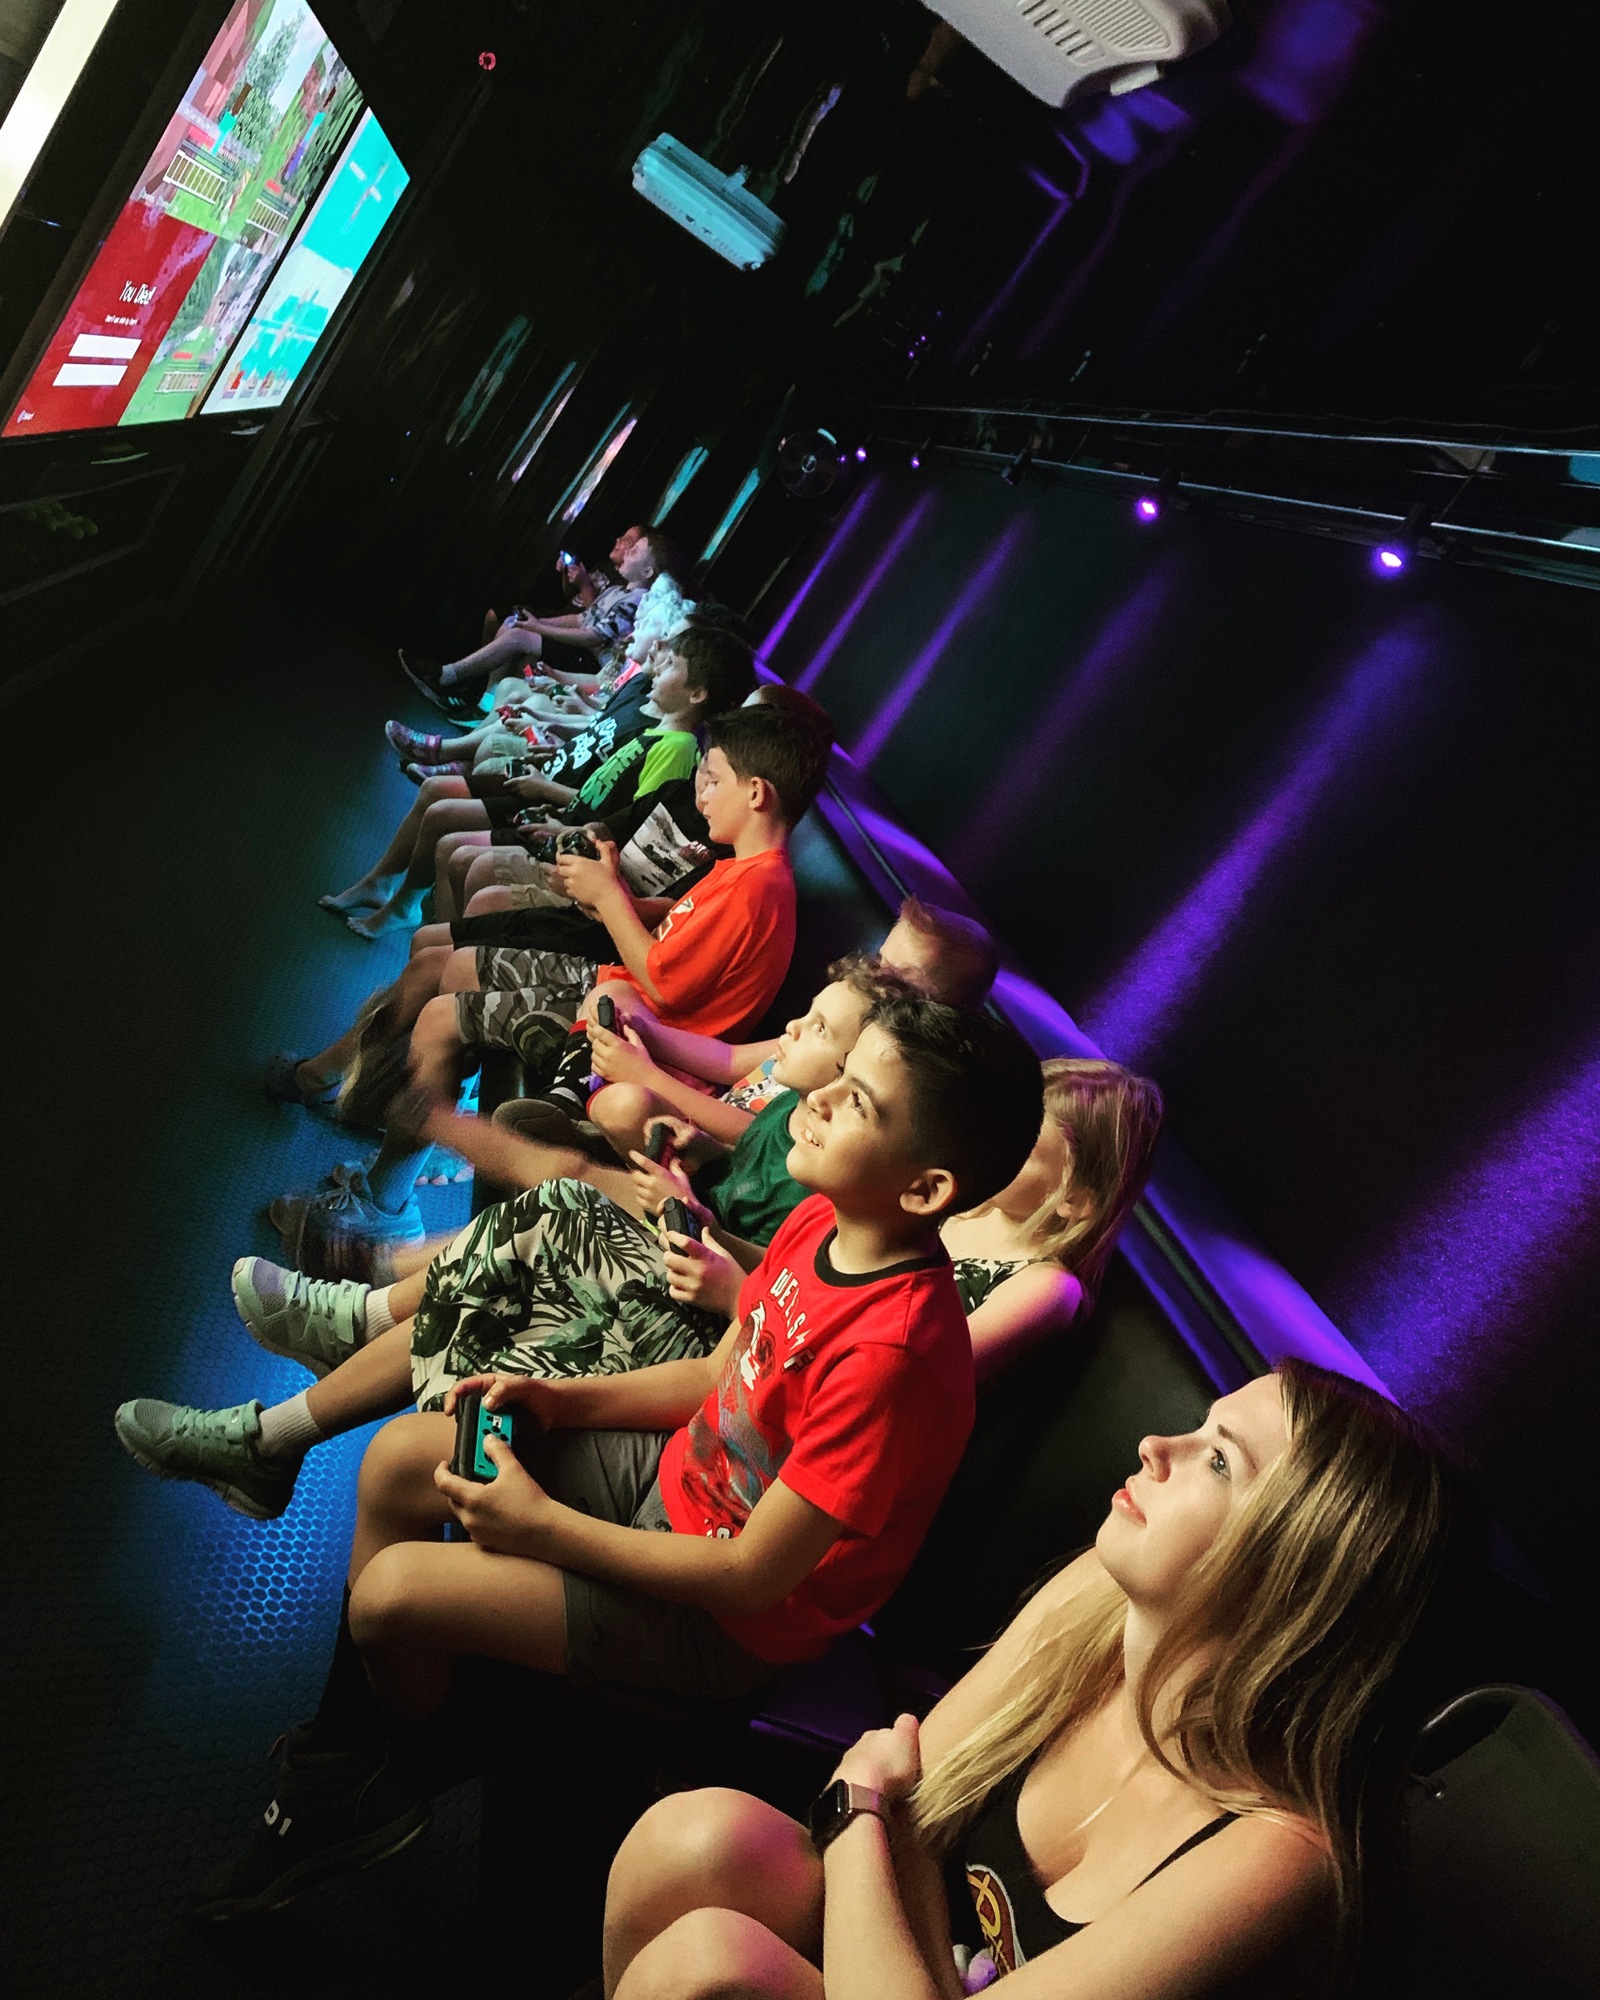 The Mobile Game Theater features multiple big-screen TVs, the latest video game consoles and more than 100 multiplayer games.